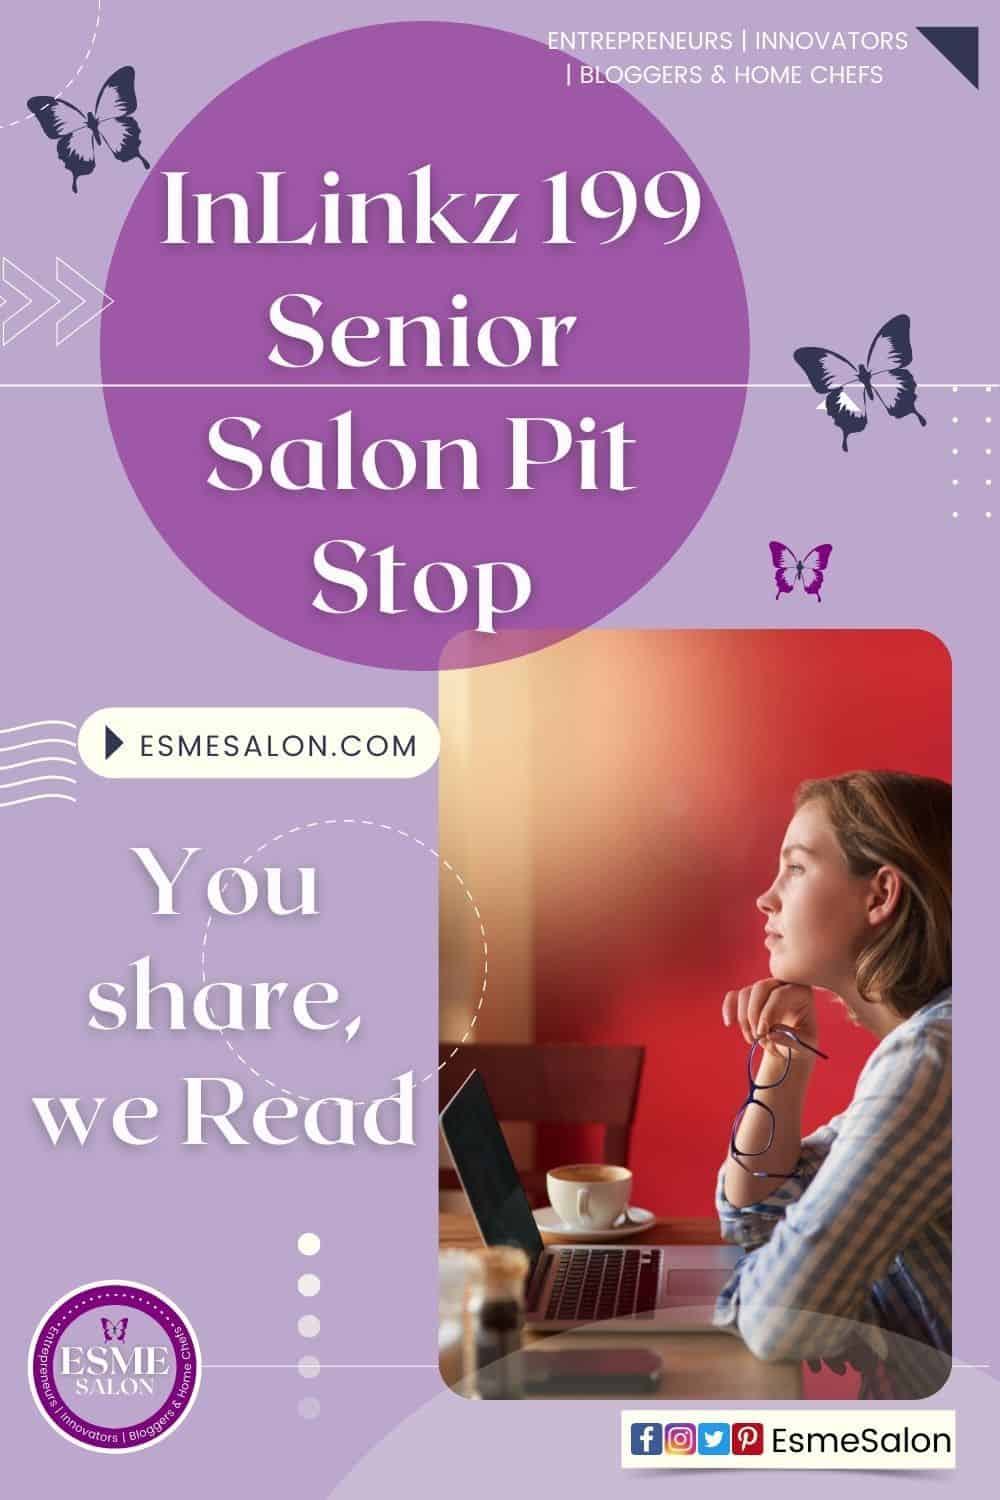 An image of InLinkz 199 Senior Salon Pit Stop with lady sitting behind computer screen and reading blog posts